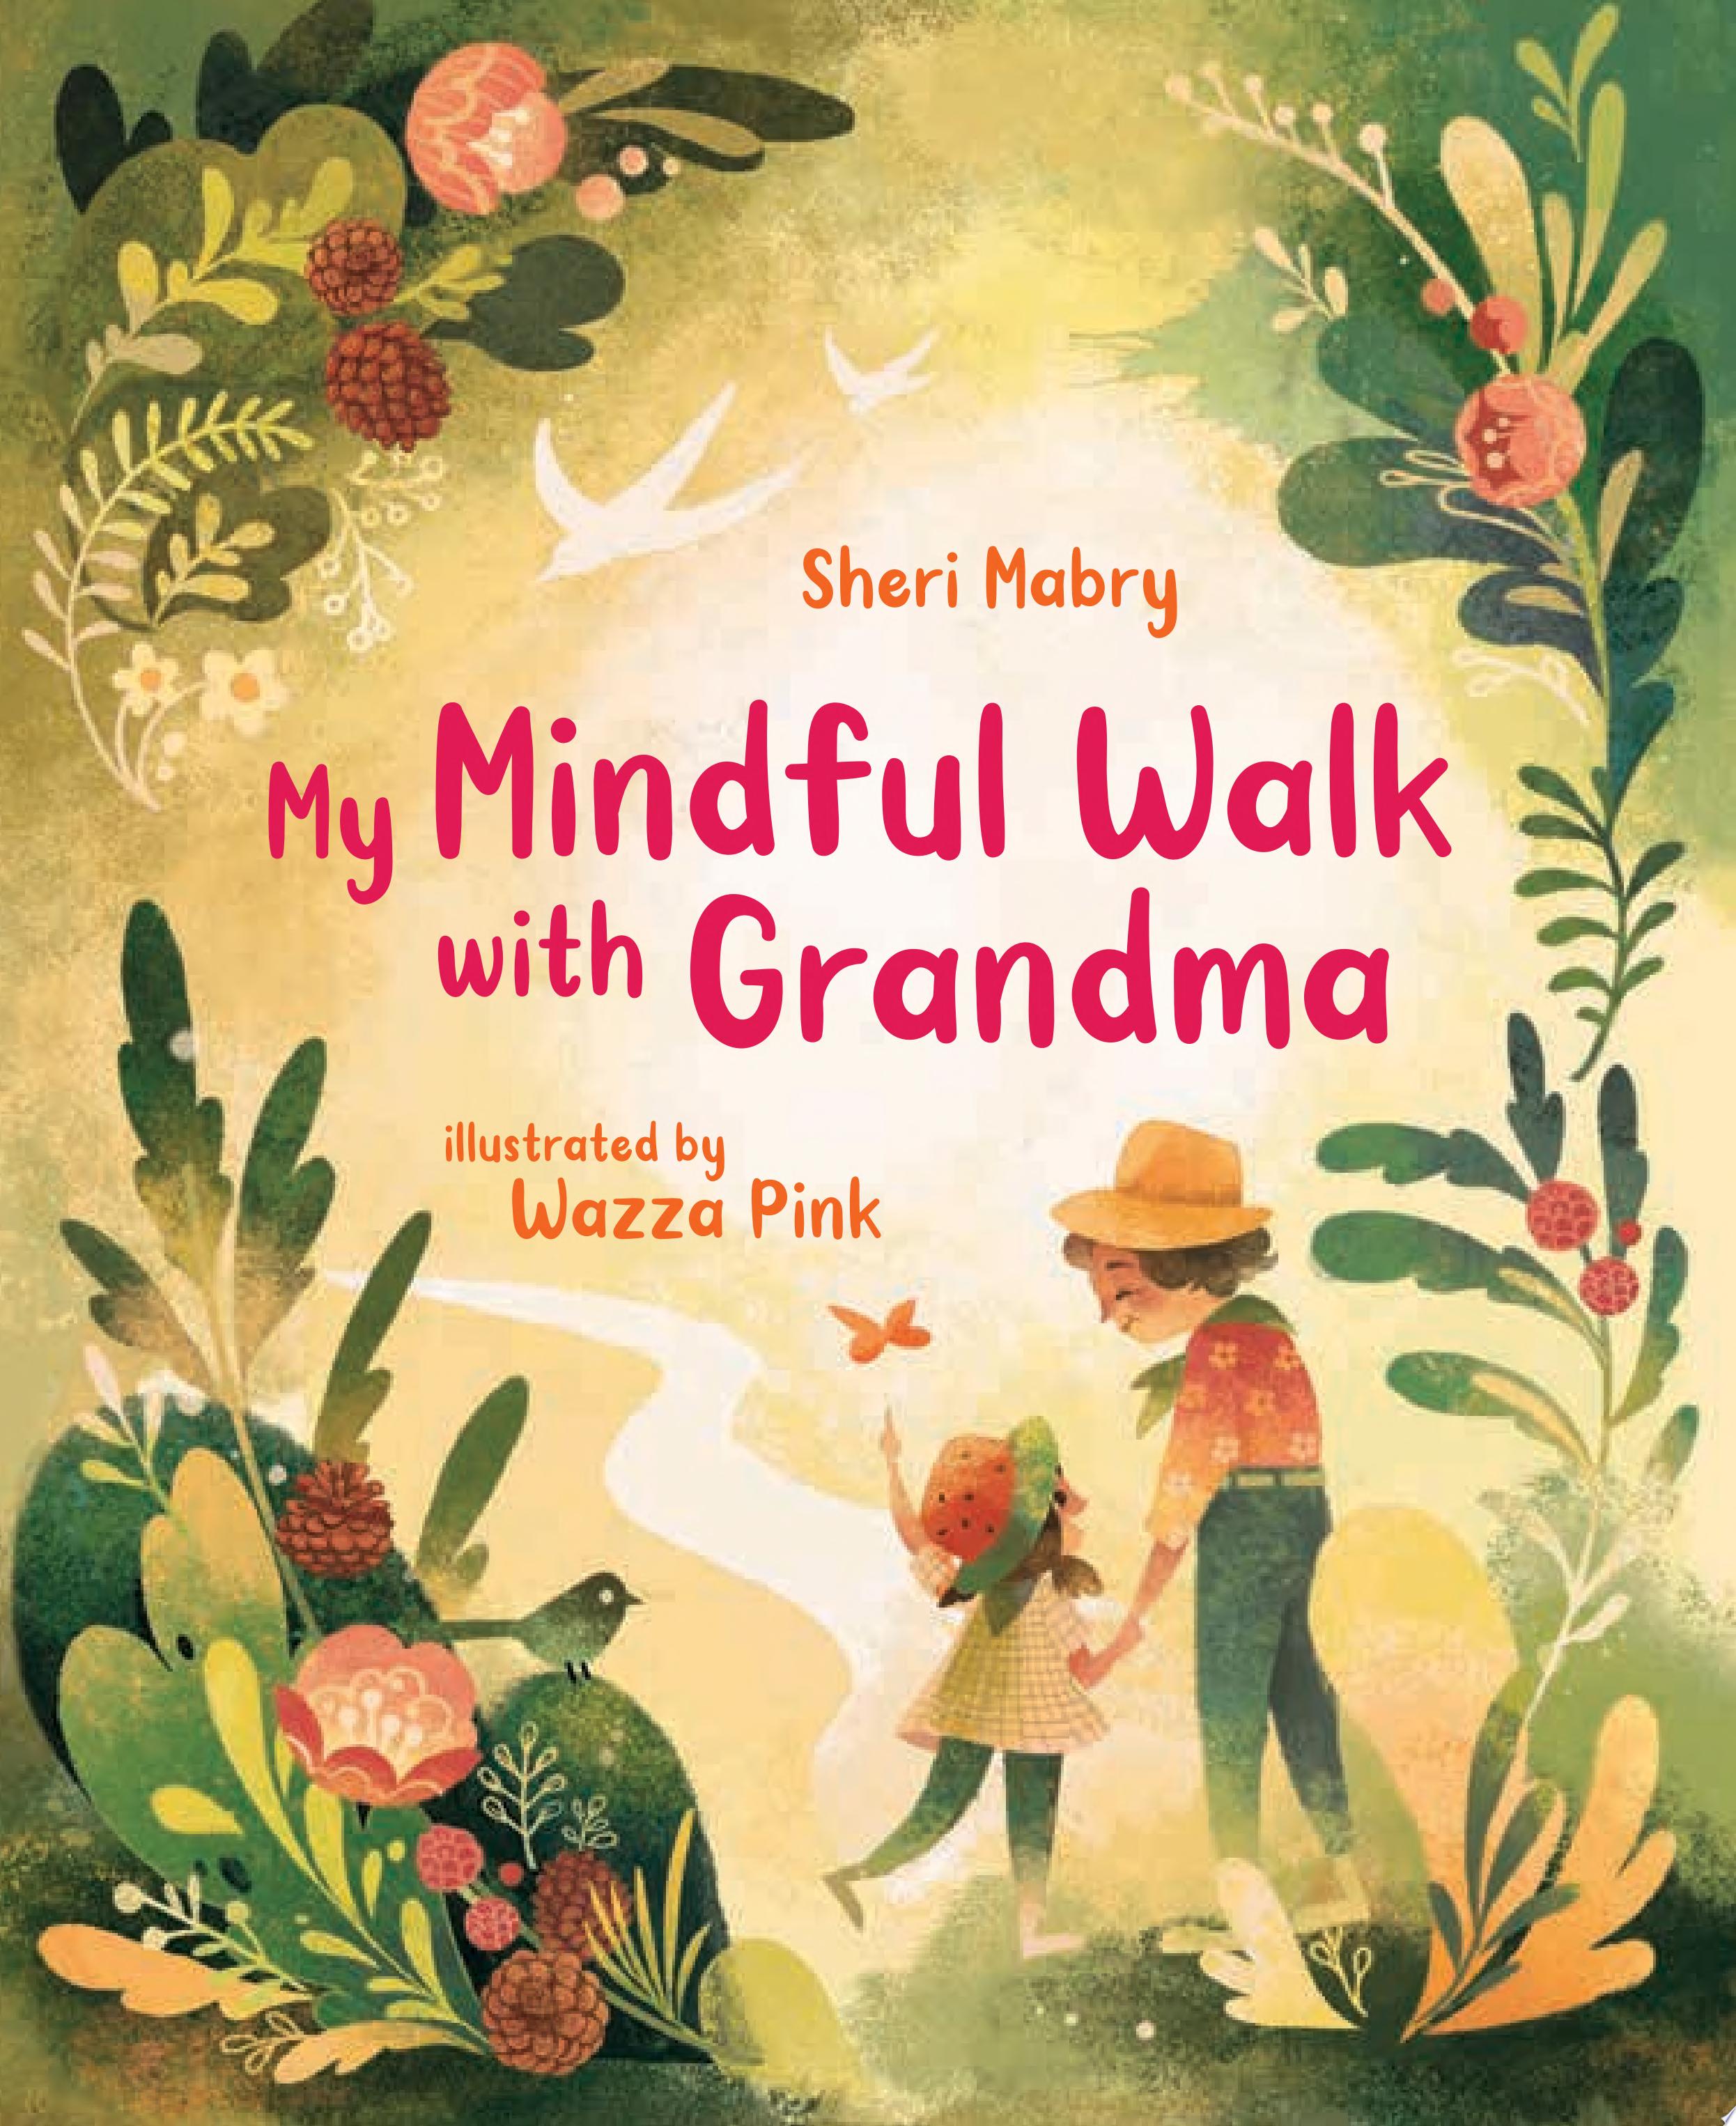 Image for "My Mindful Walk with Grandma"